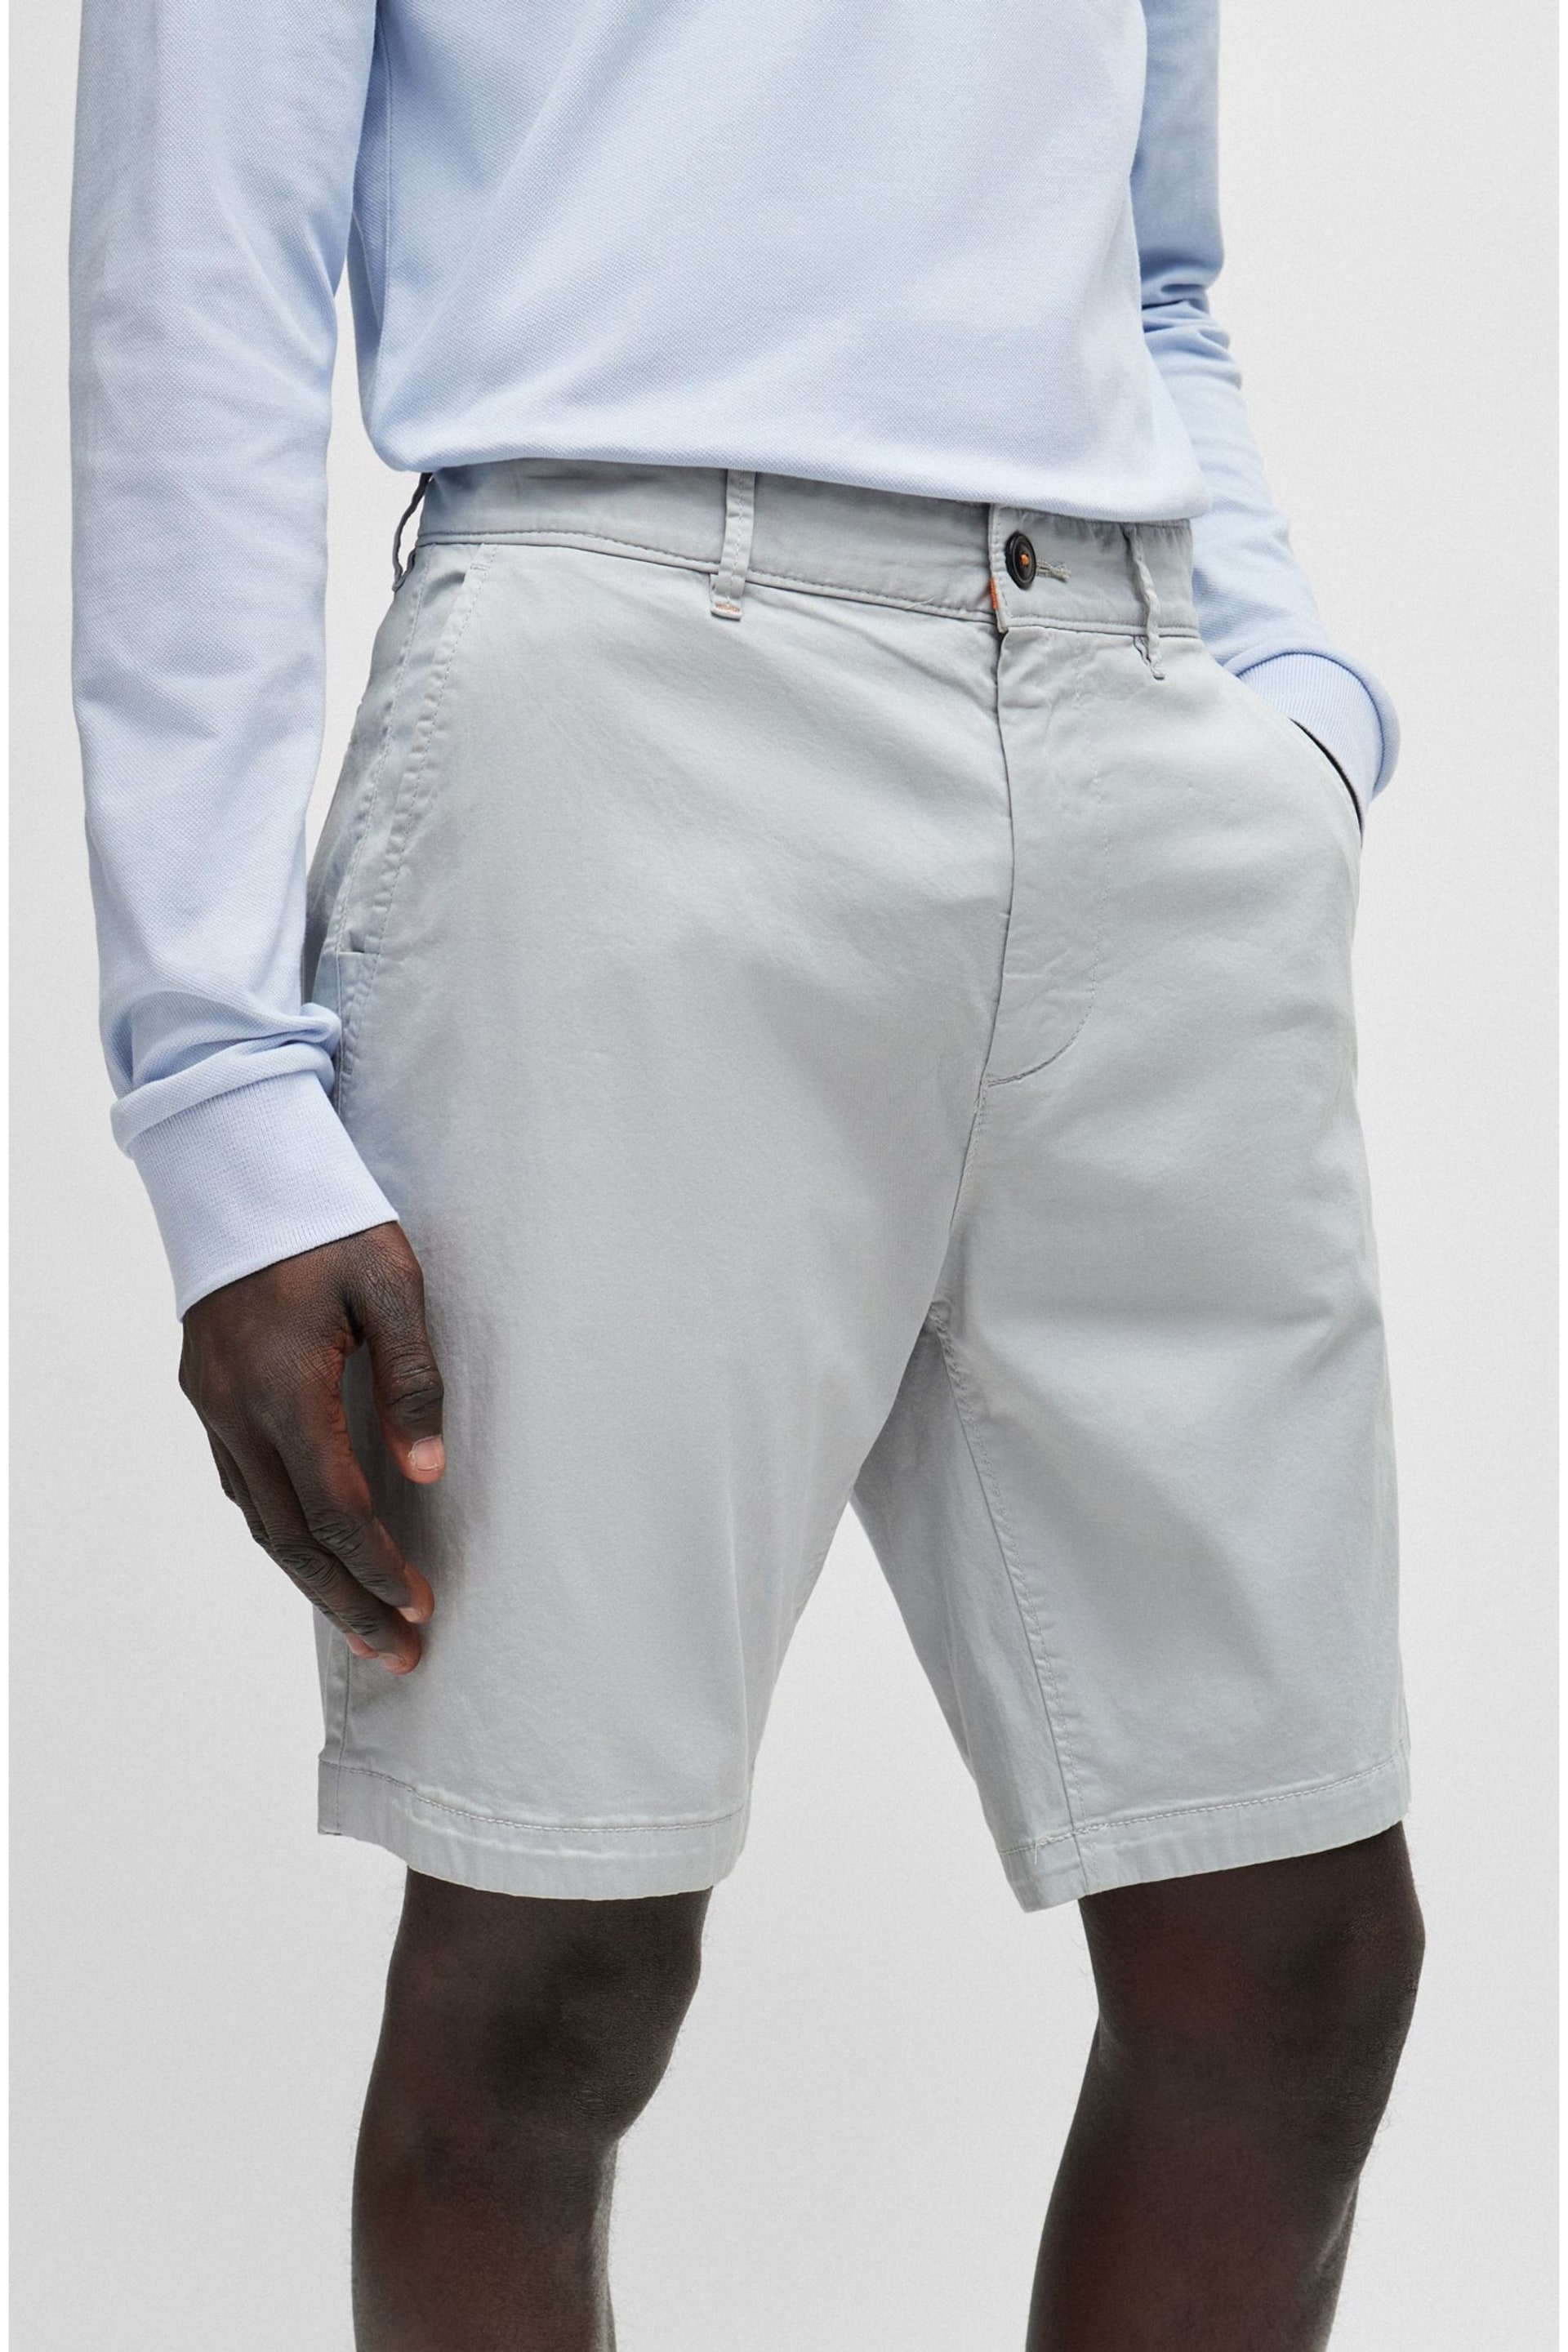 BOSS Grey Slim Fit Stretch Cotton Chino Shorts - Image 4 of 5